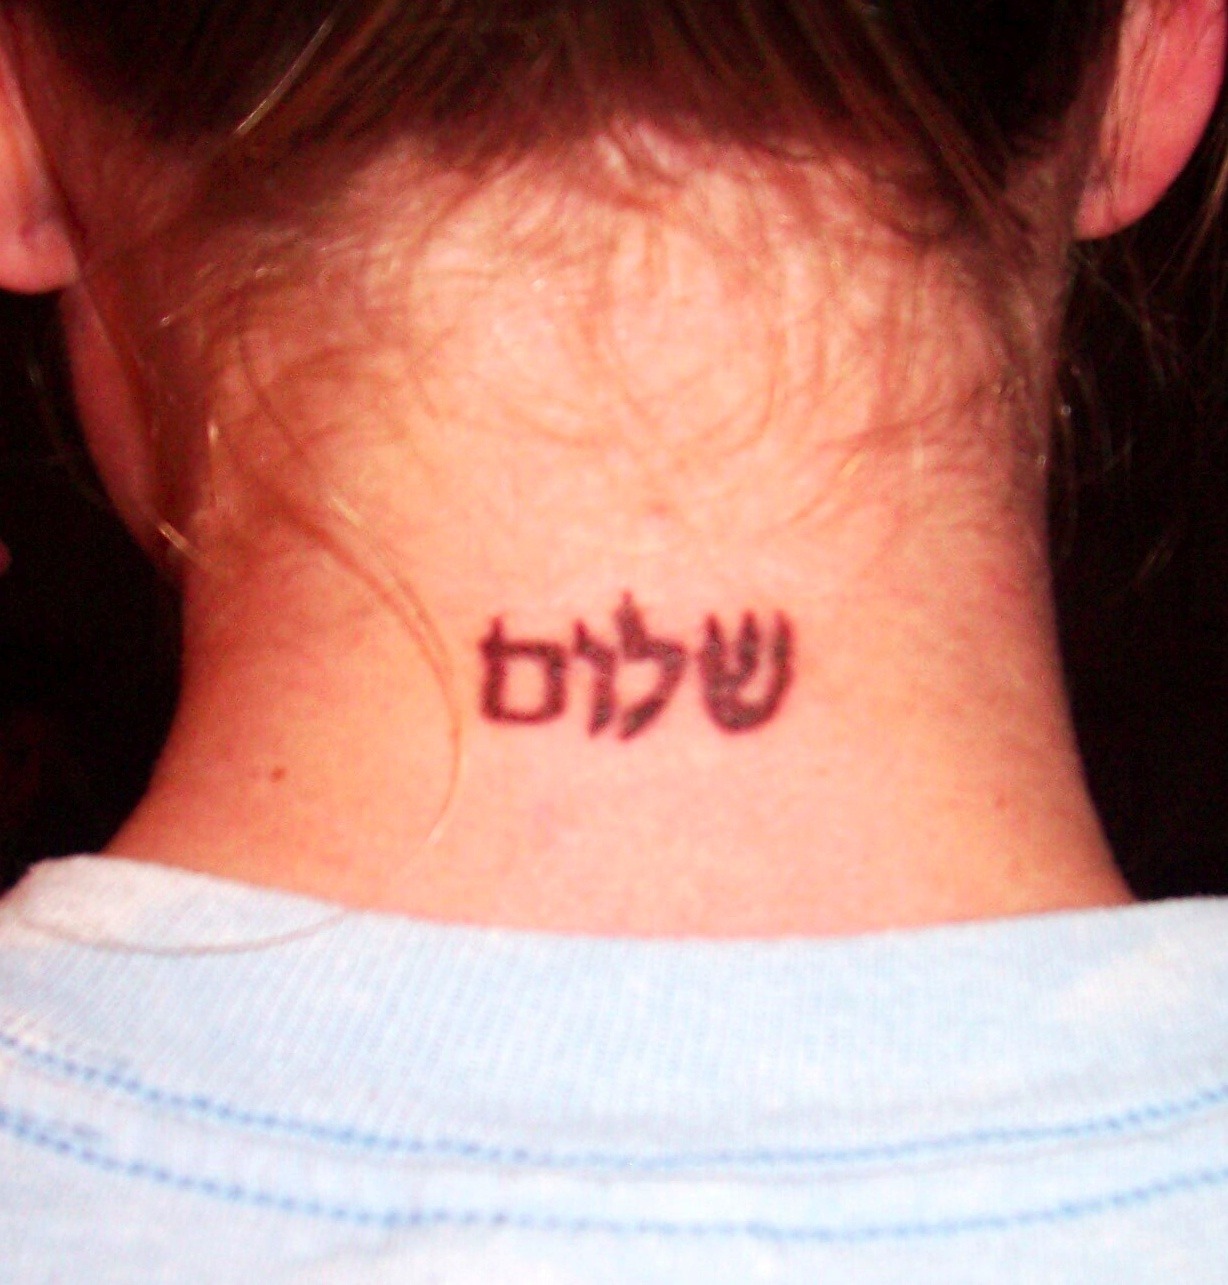 Hebrew Tattoos: The trend in Holland, Michigan - Our Rabbi Jesus